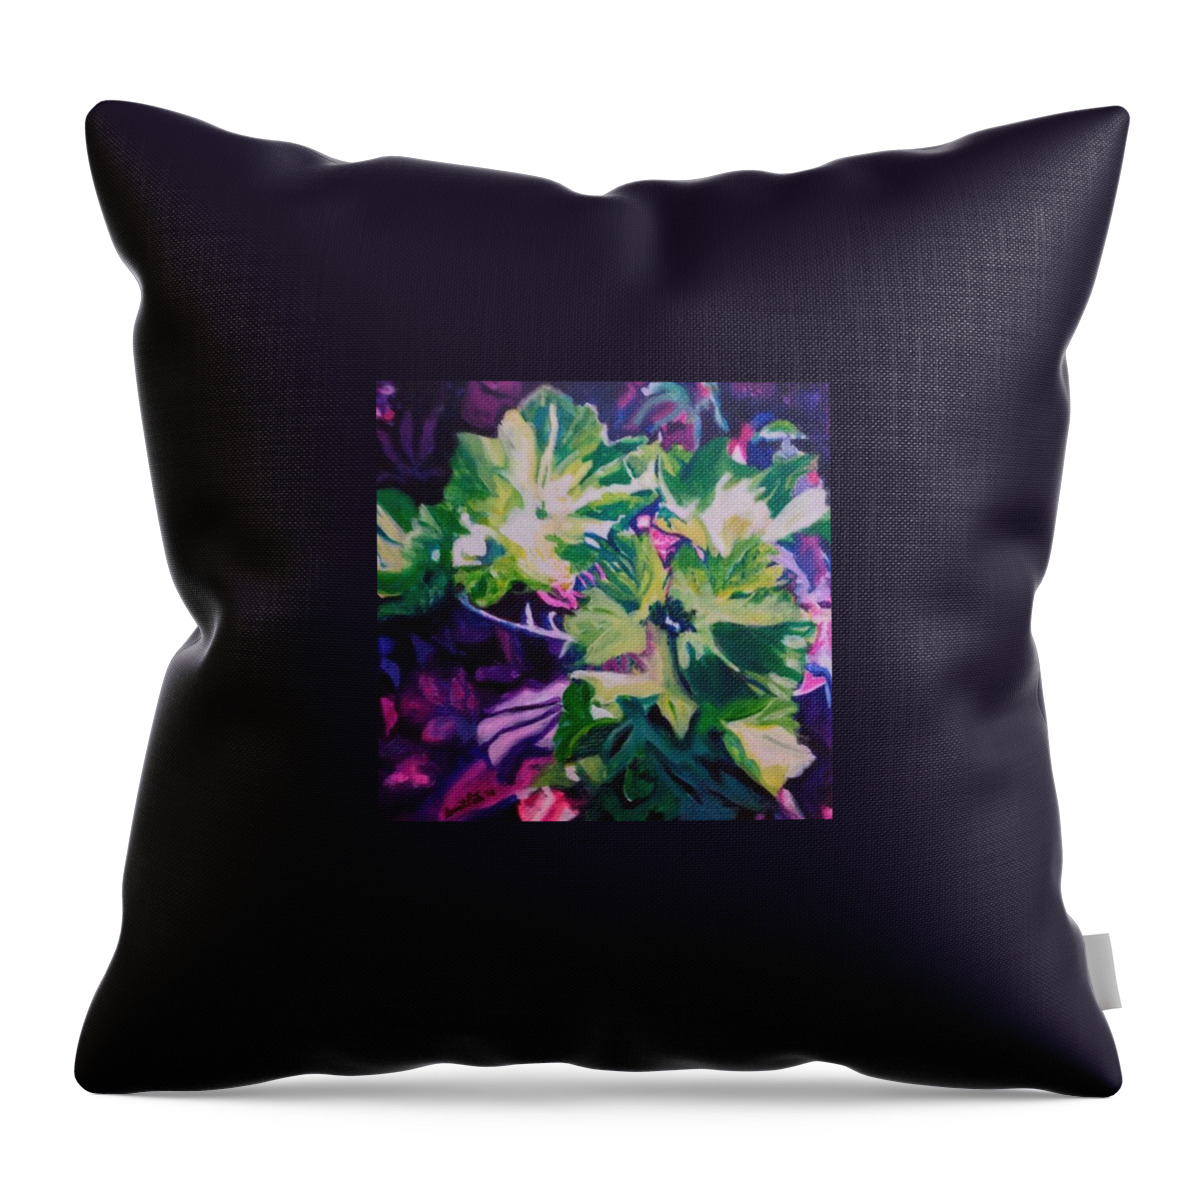 Life On Mars Throw Pillow featuring the photograph Life On Mars by Anna Porter